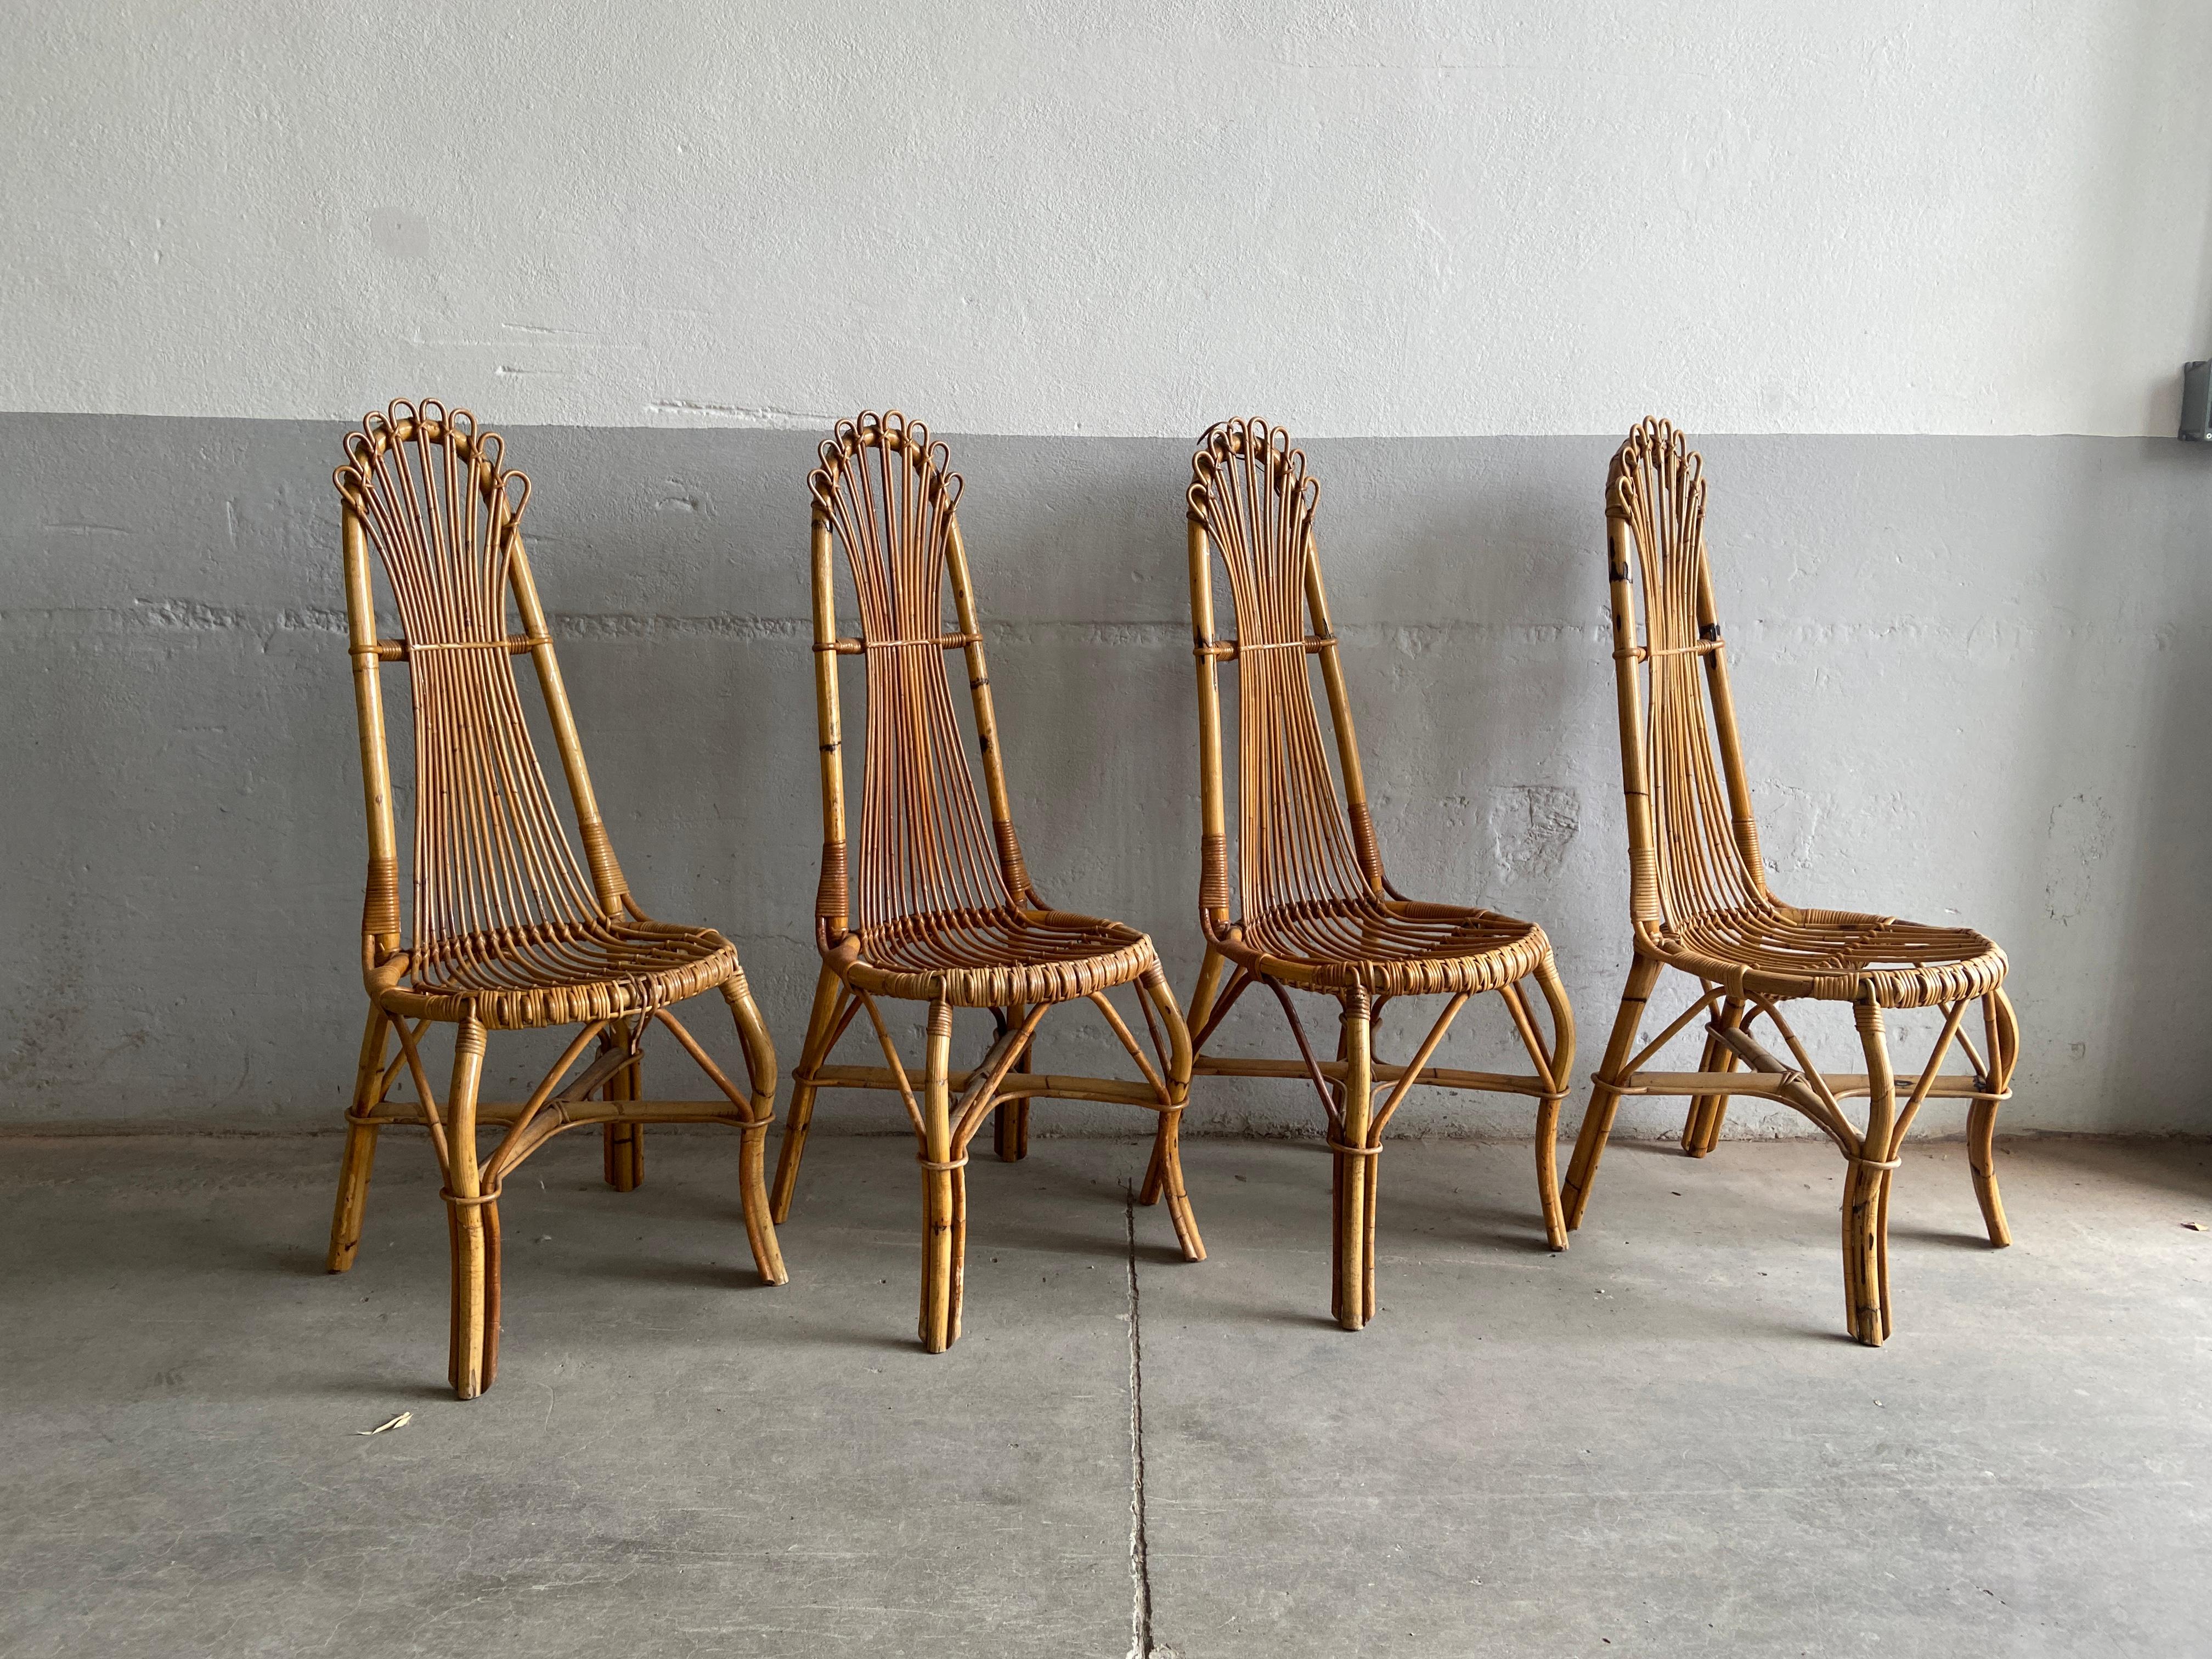 Mid-Century Modern set of 4 French Riviera bamboo and rattan dining room chairs.